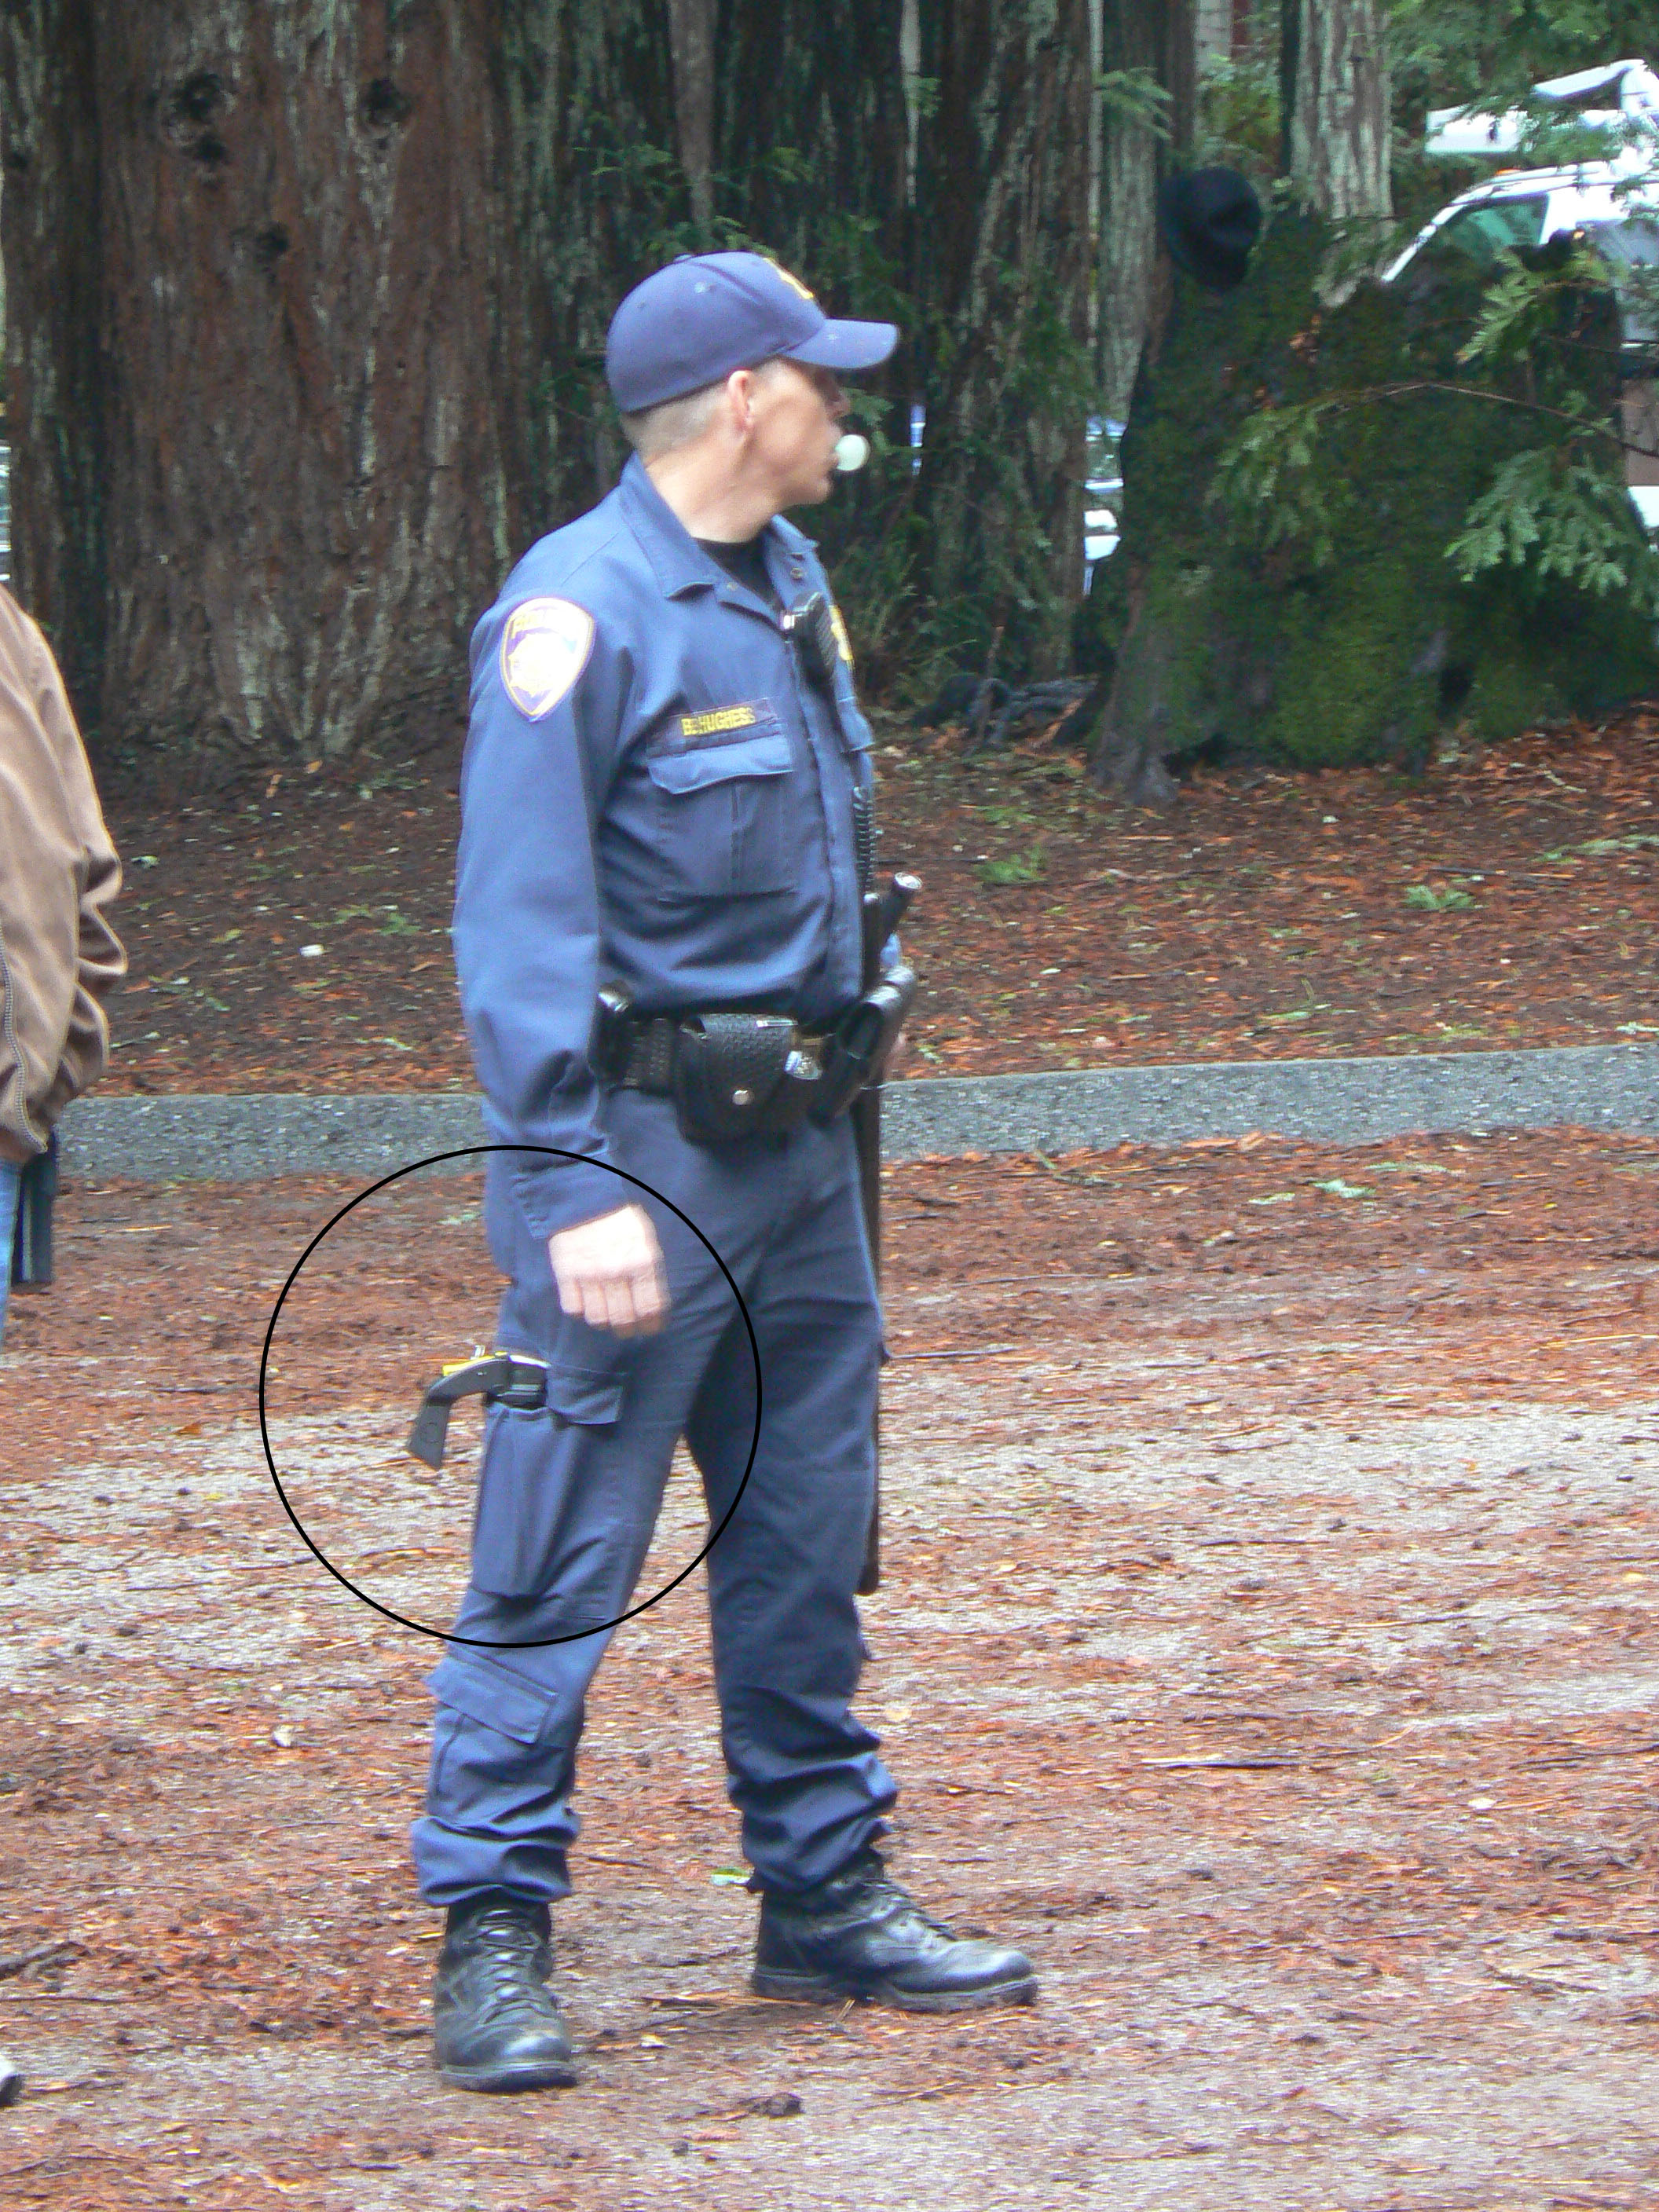 Report & more photos from Dec. 17 police actions at UCSC tree-sit : Indybay